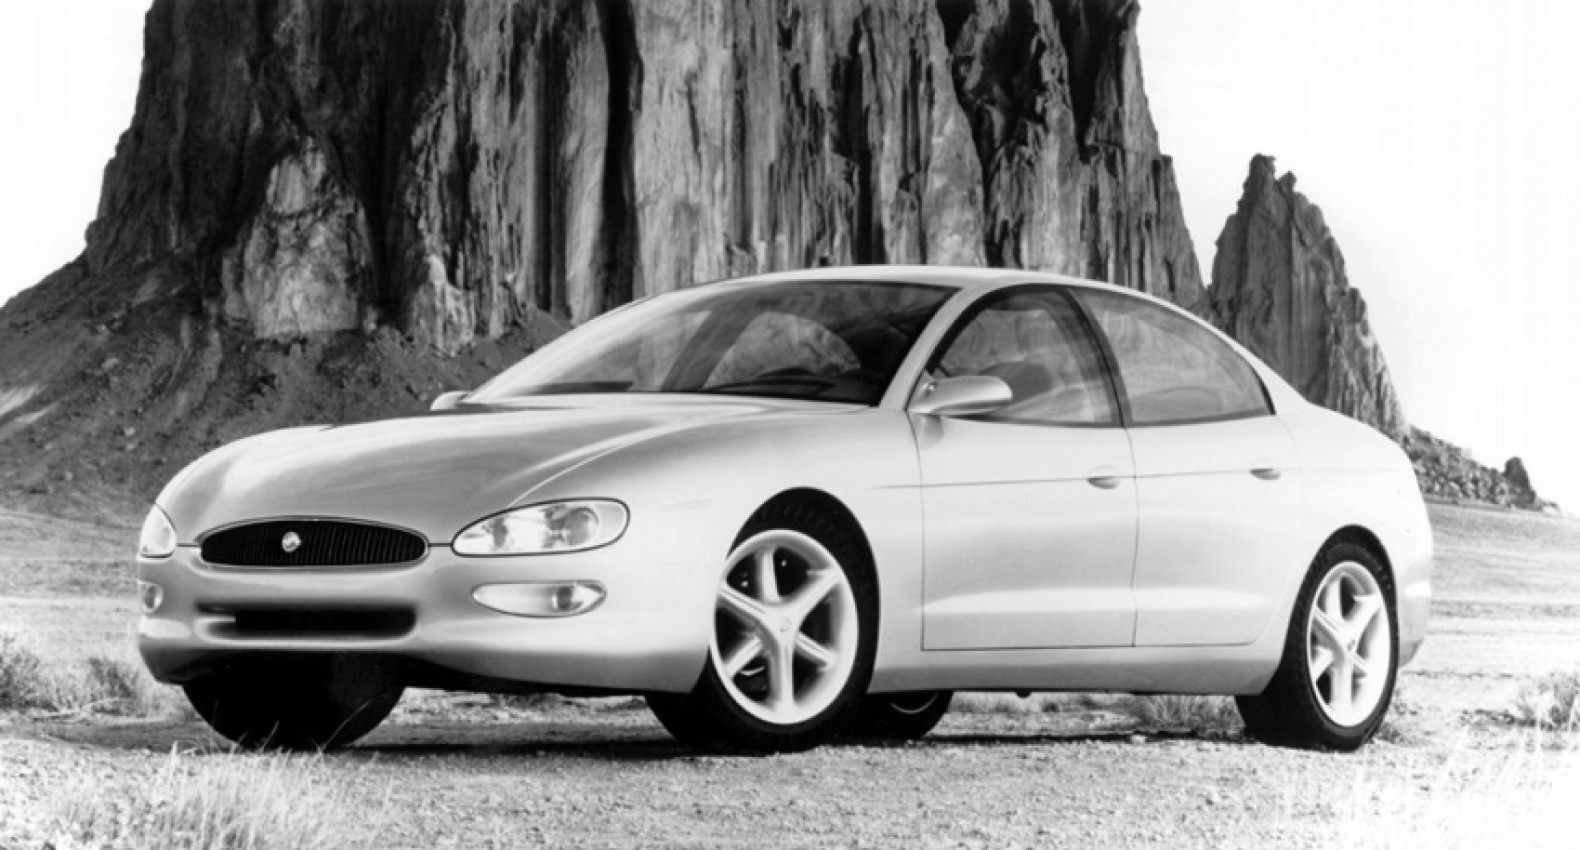 autos, buick, cars, review, 1990s, 2000s cars, buick model in depth, 1995 buick xp2000